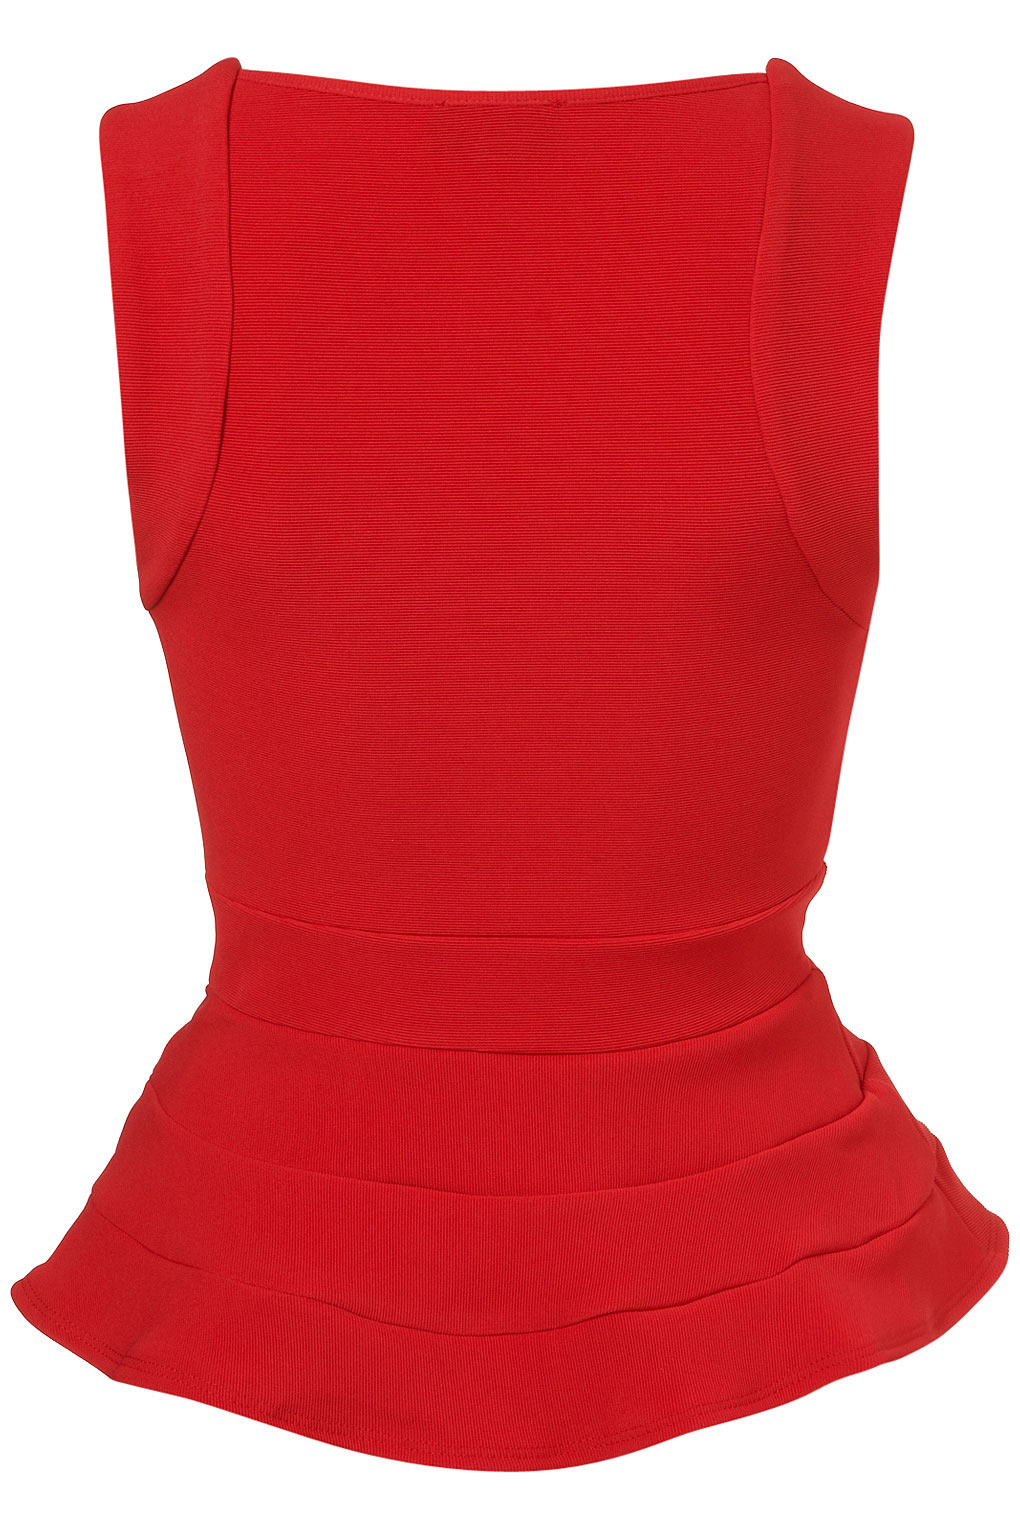 Lyst - Topshop Bandage Peplum Top in Red